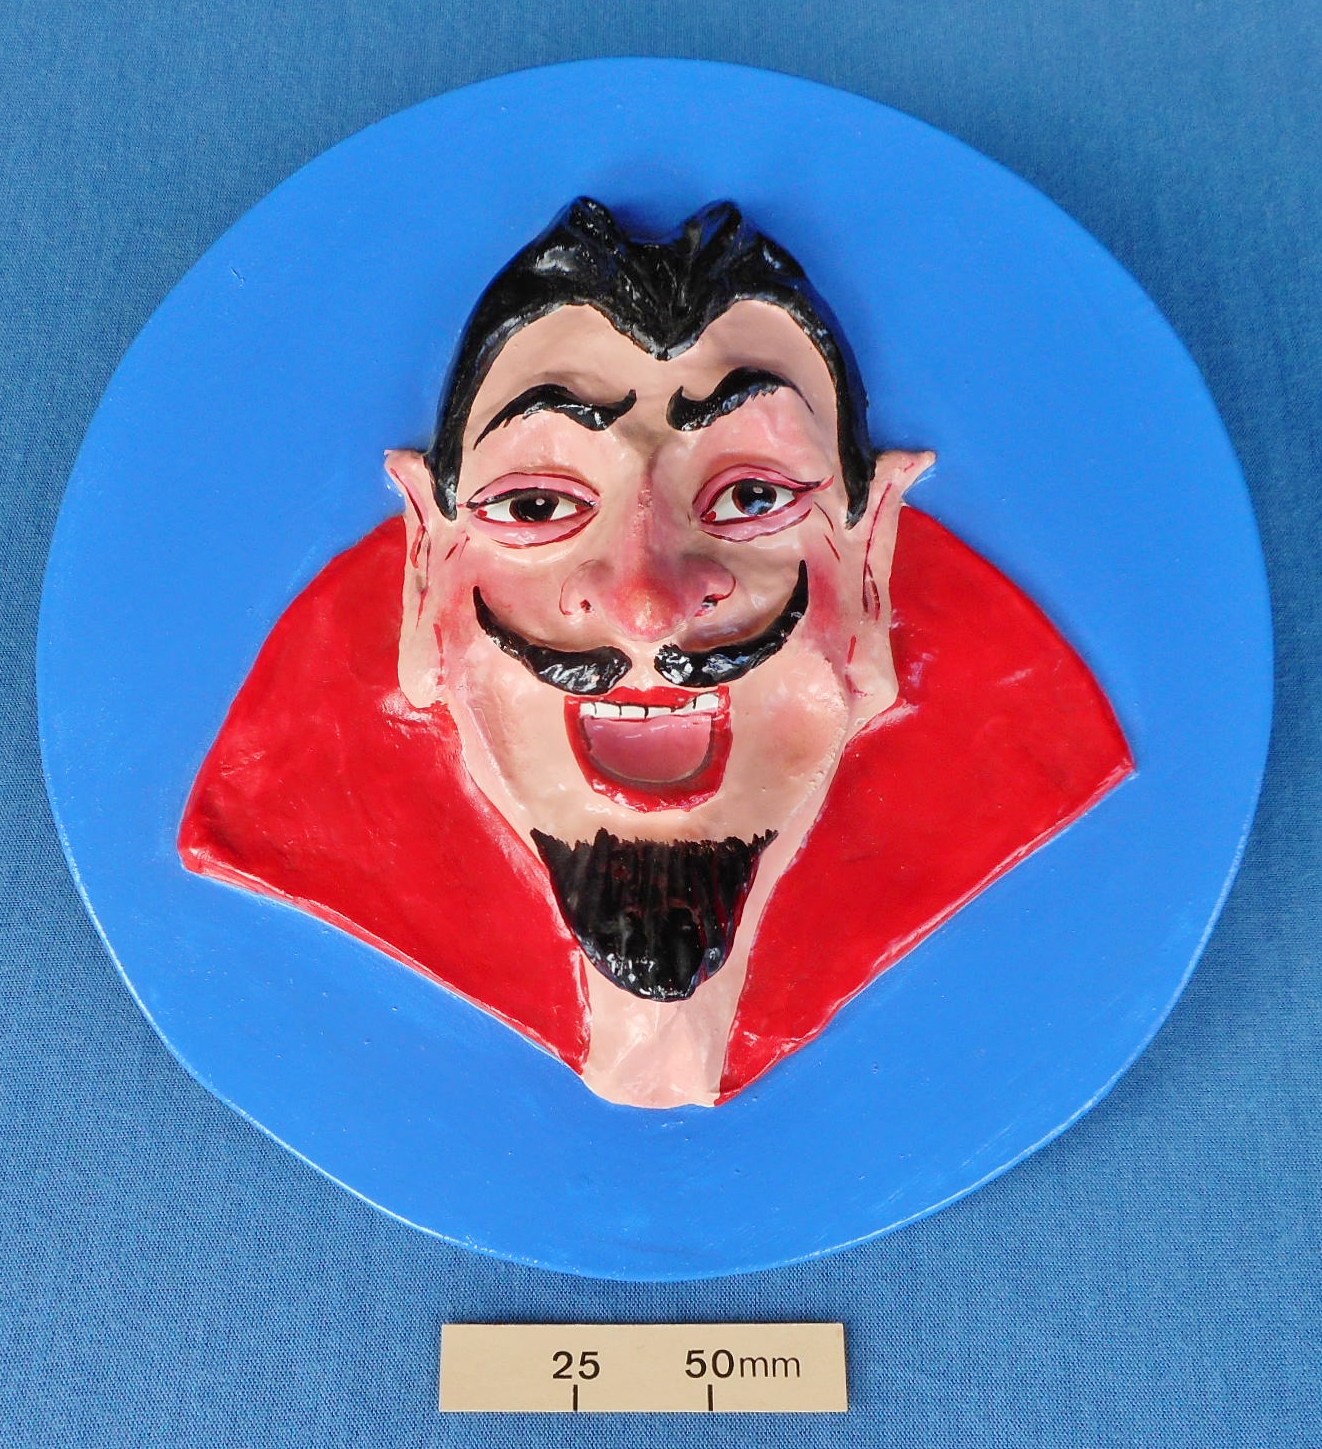 Davenport demon plaque made by Bryan Baggs